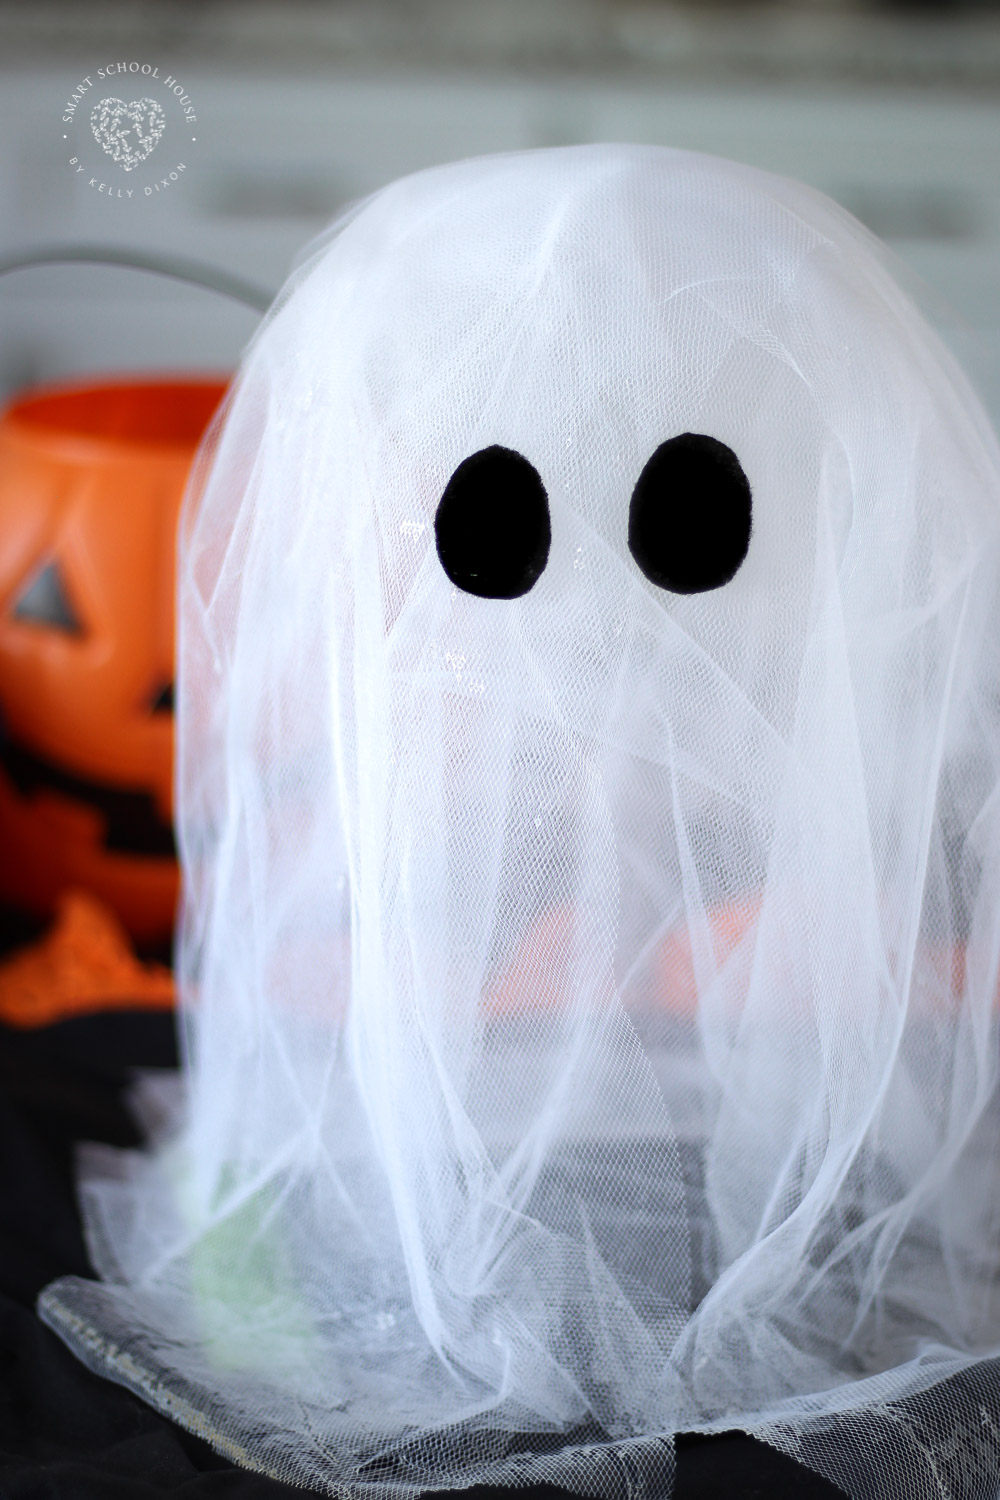 This Spooky Floating Tulle Ghost is so easy and adorable you simply can’t help but love it. One special ingredient makes these SUPER easy!